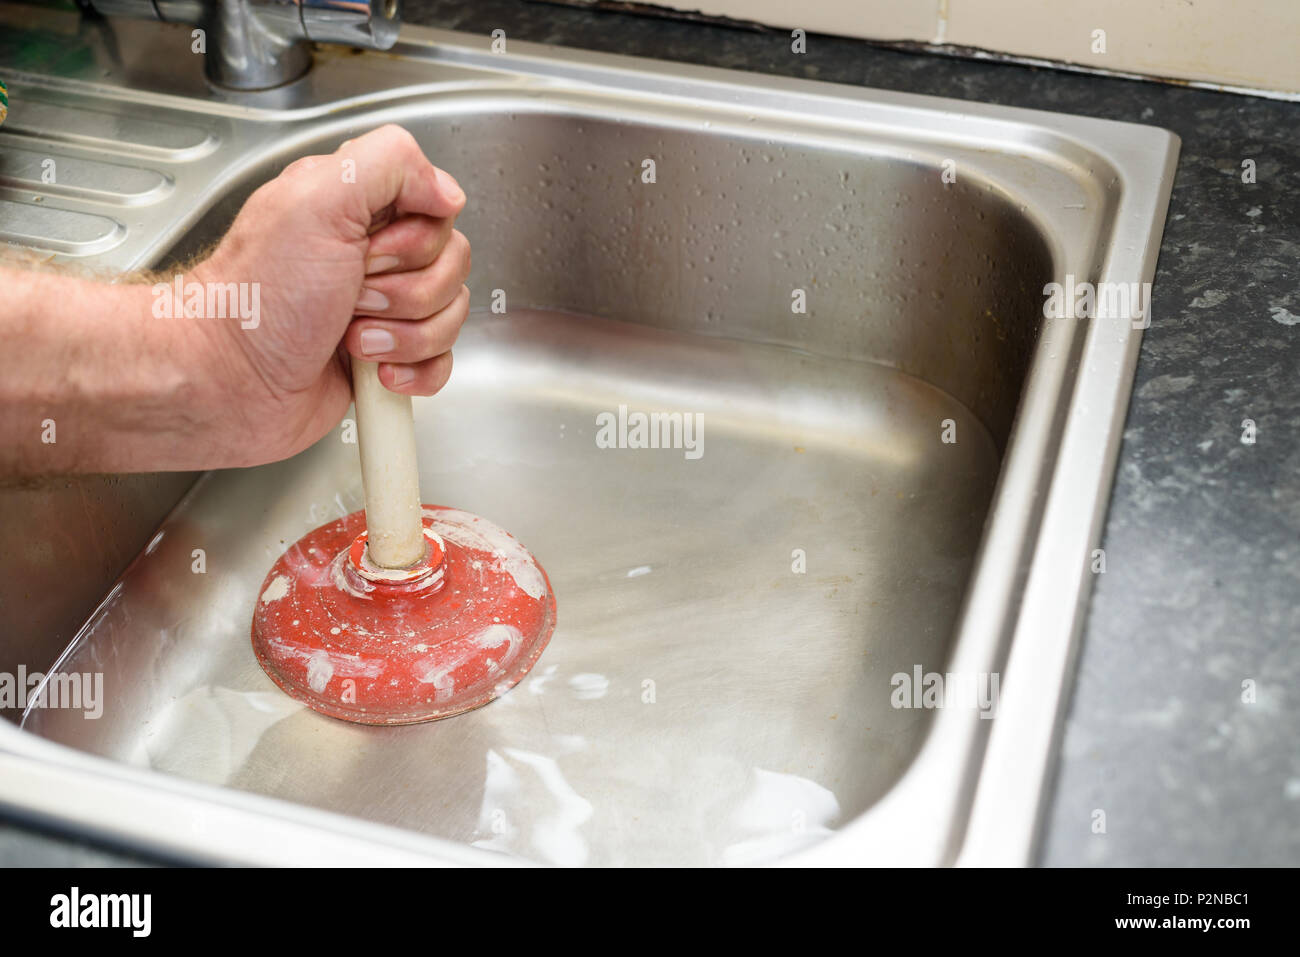 https://c8.alamy.com/comp/P2NBC1/man-holding-a-plunger-with-one-hand-and-water-in-sink-used-to-clean-a-clogged-blocked-kitchen-sink-P2NBC1.jpg